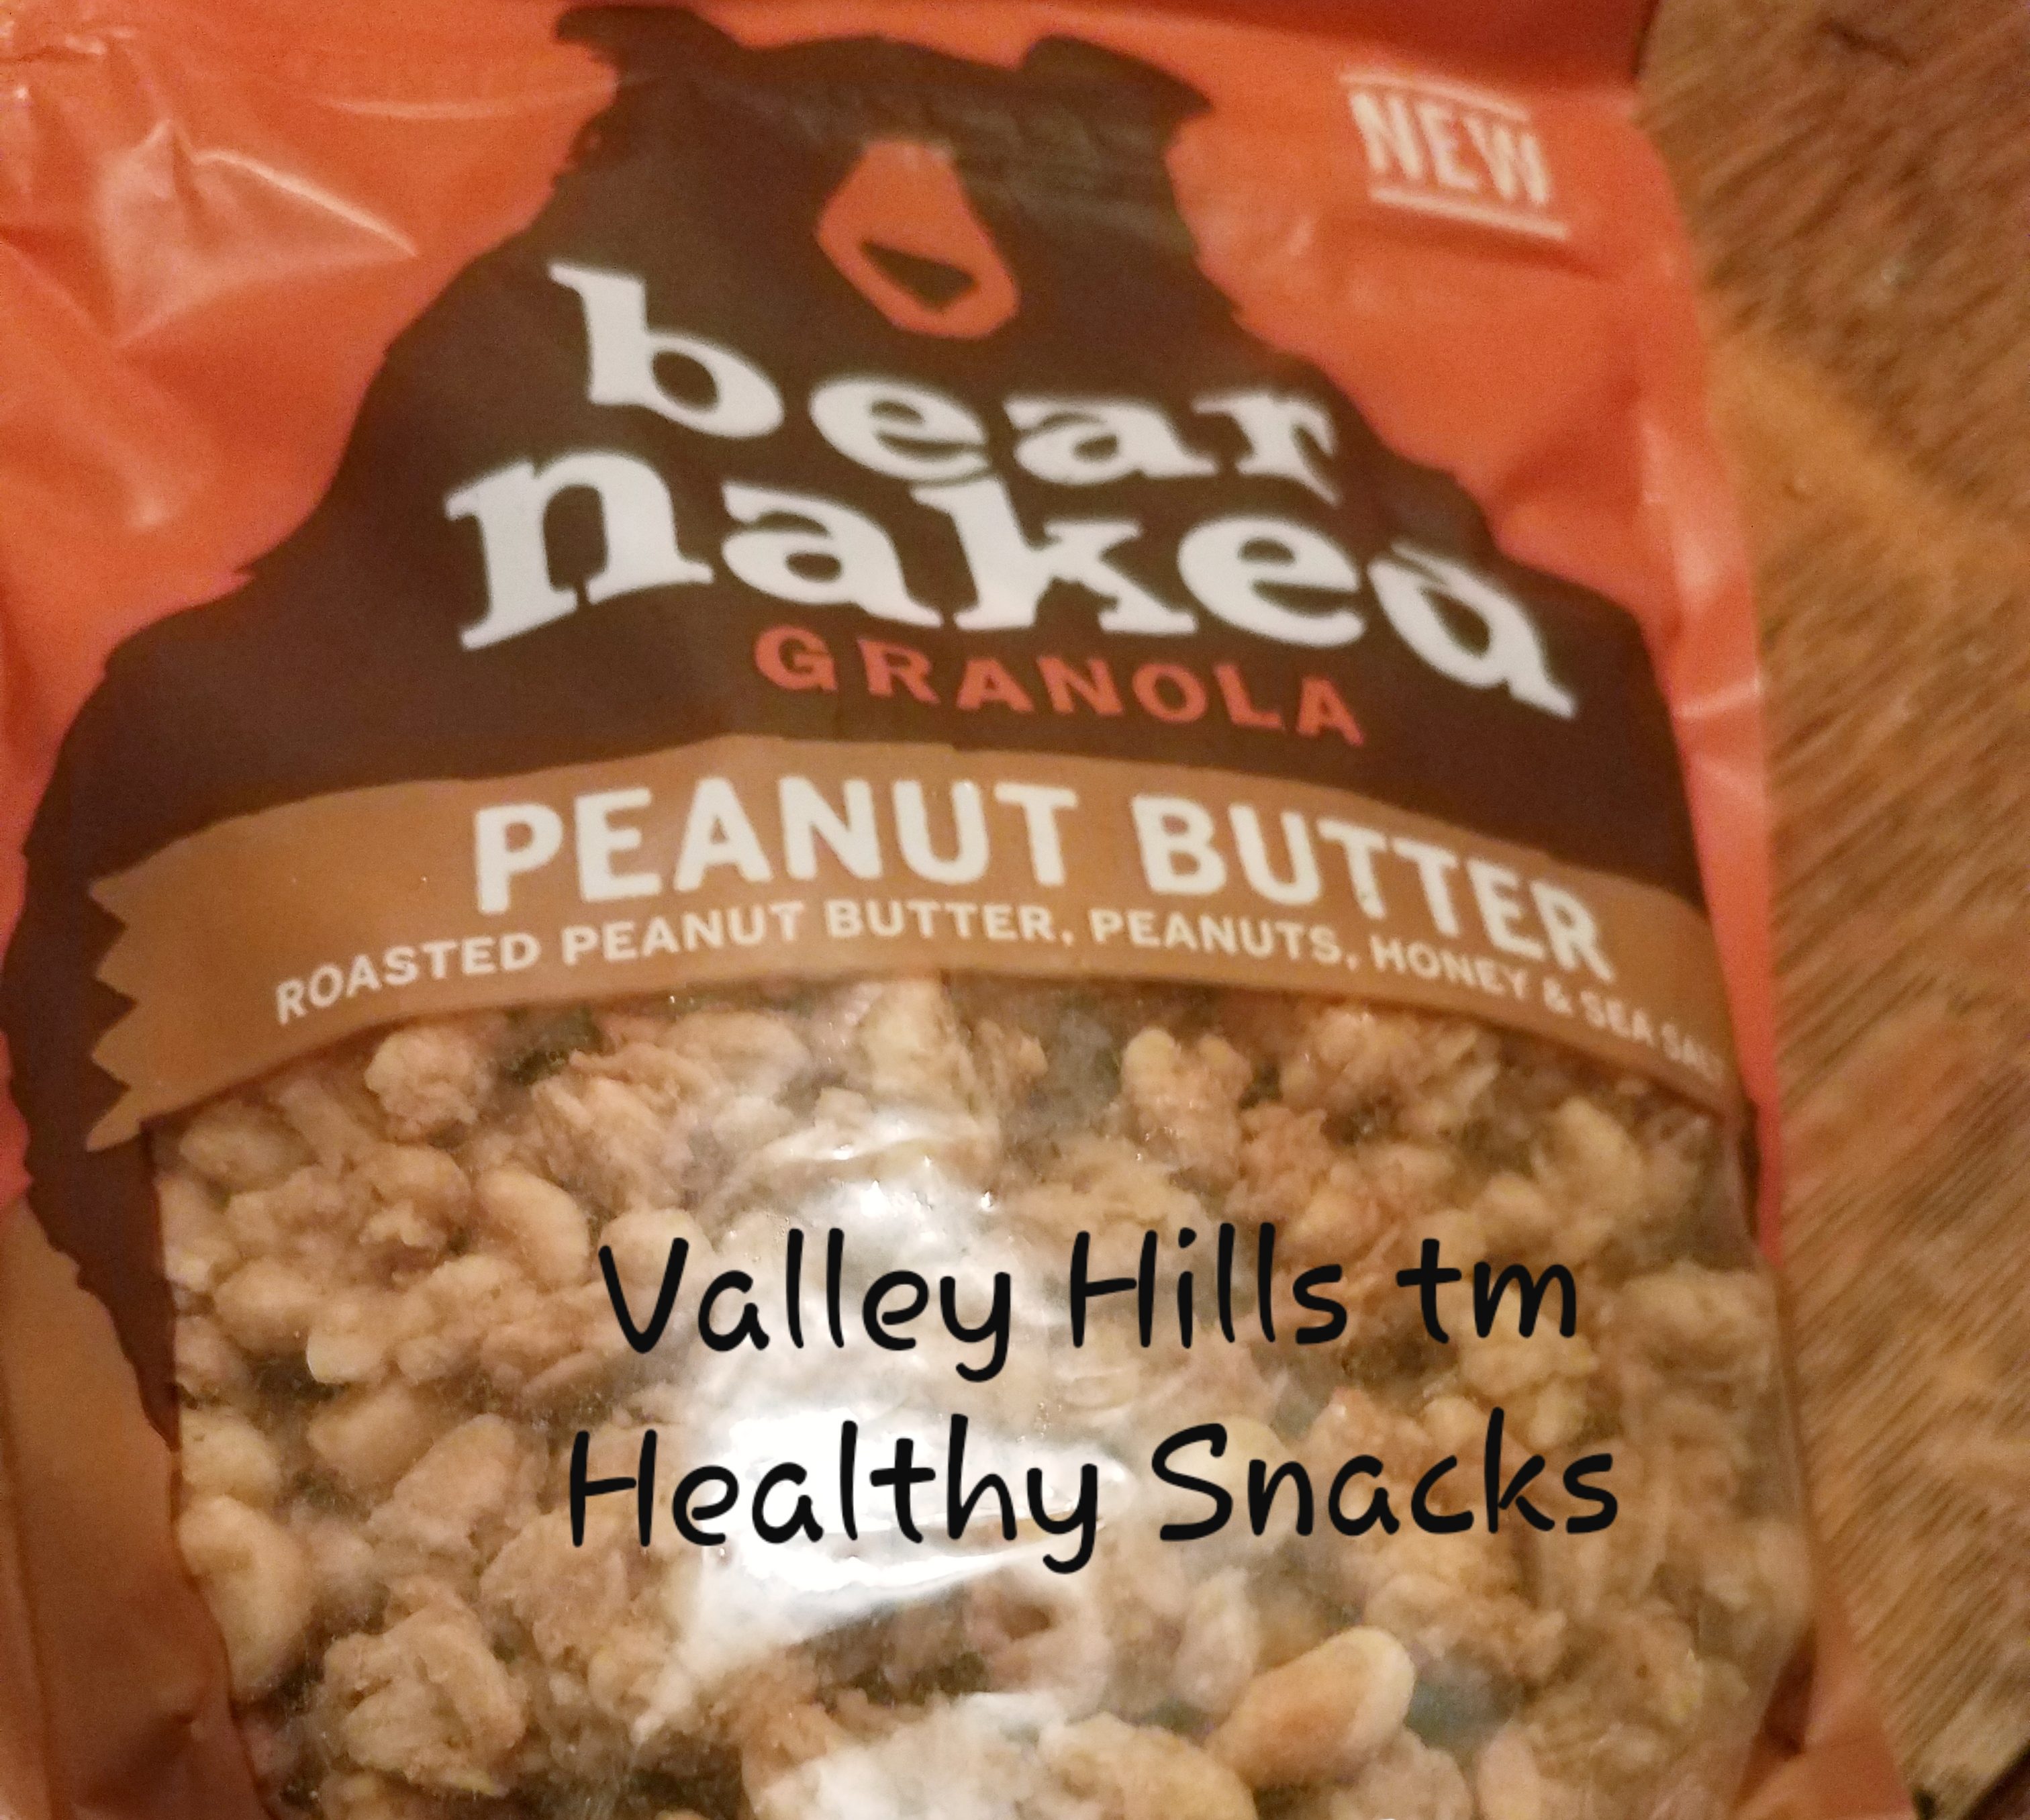 BEAR NAKED CEREAL: PEANUT BUTTER FROM VALLEY HILLS tm NUTRITION